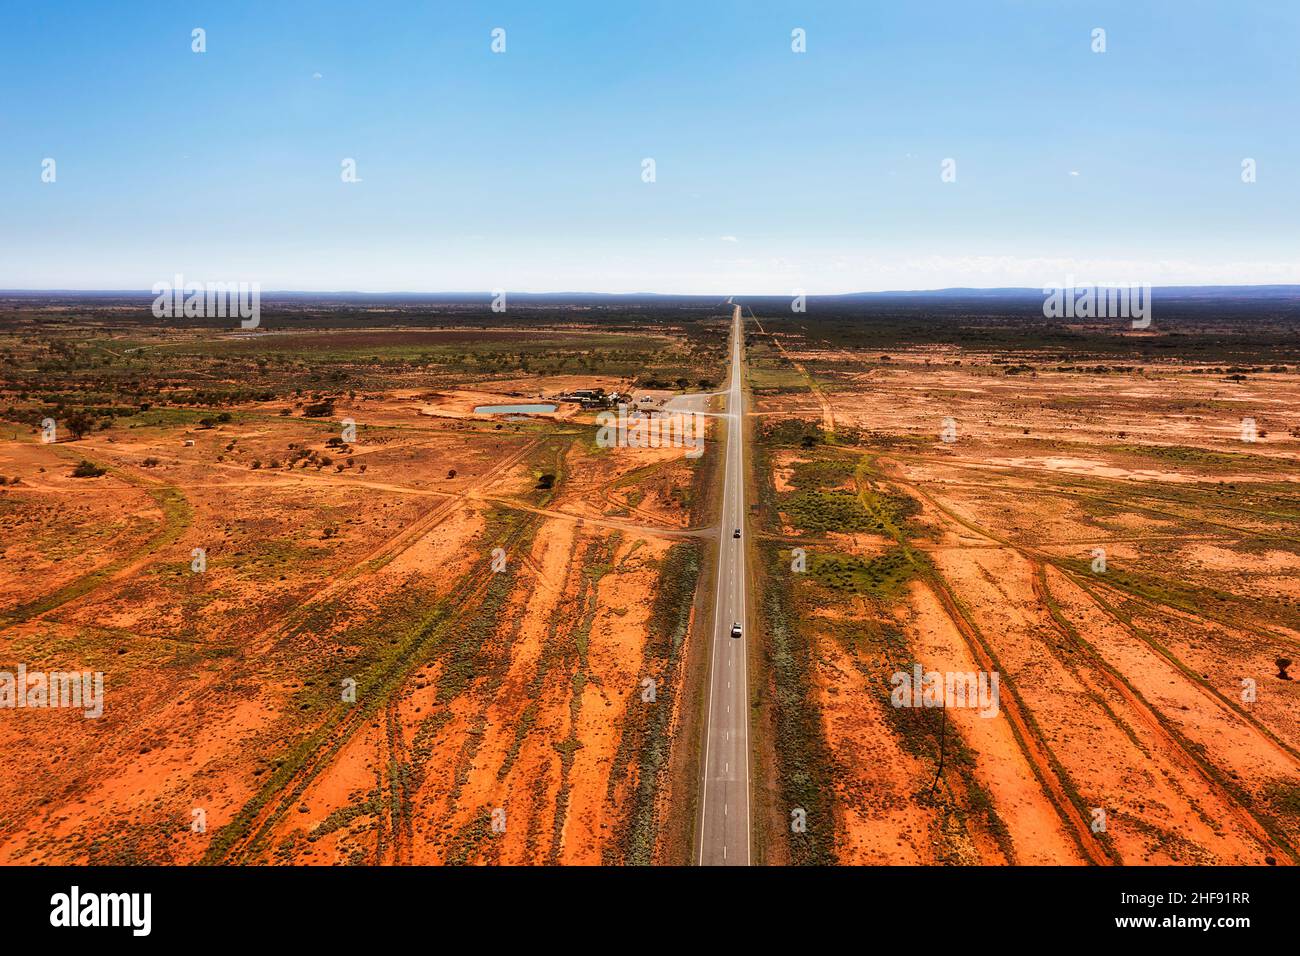 Stop over rest area and fuel station roadhose motel on Barrier highway in far west outback of Australia - aerial landscape. Stock Photo